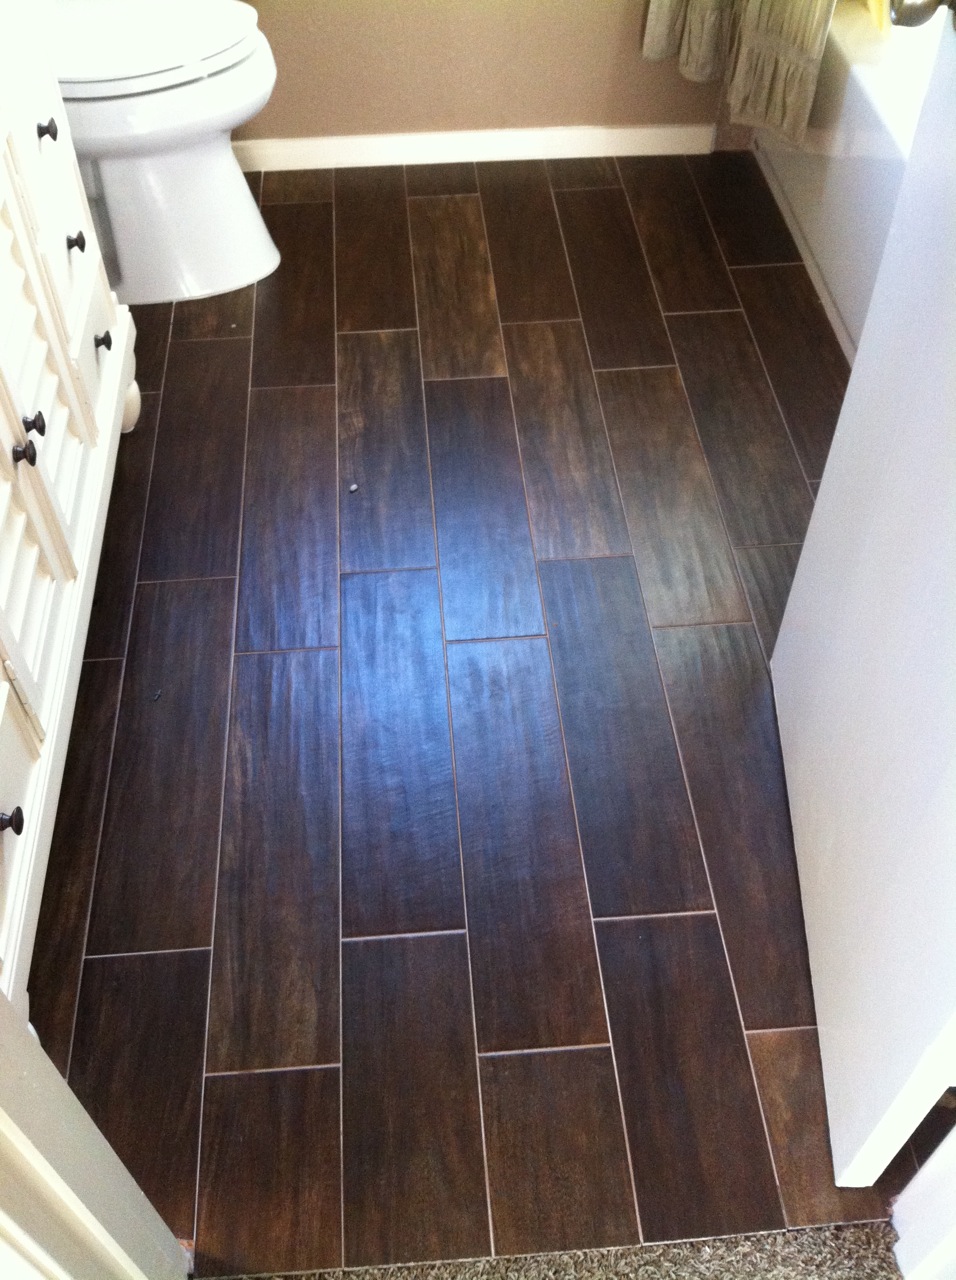 25 pictures and ideas of wood effect bathroom floor tile